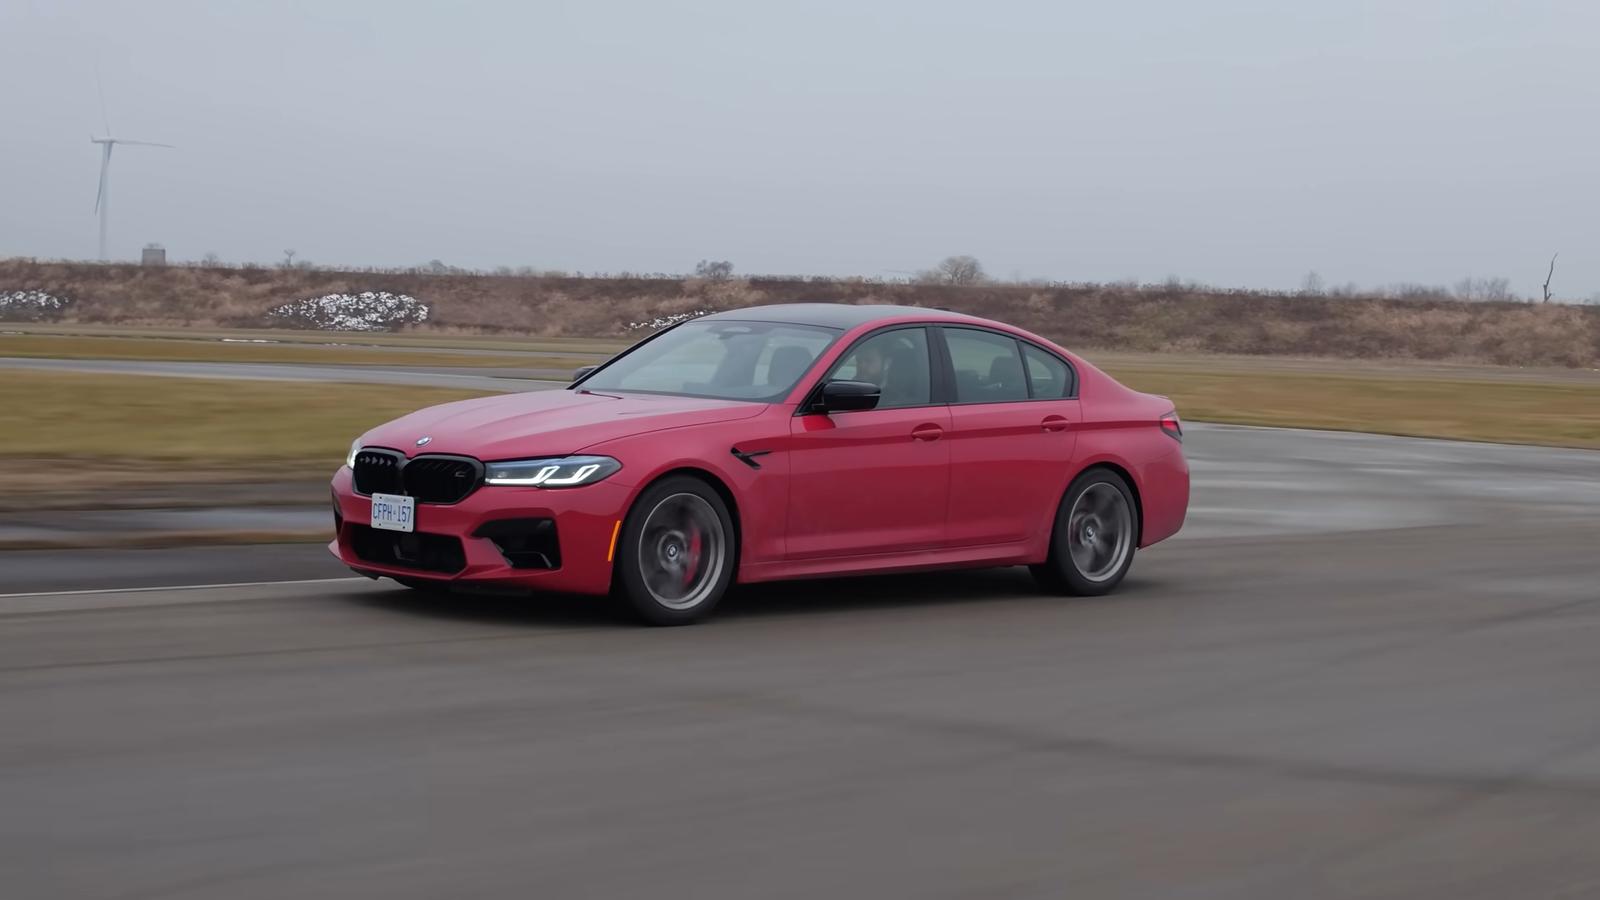 Vs youtube rocket2021bmwm5competitionreview 106